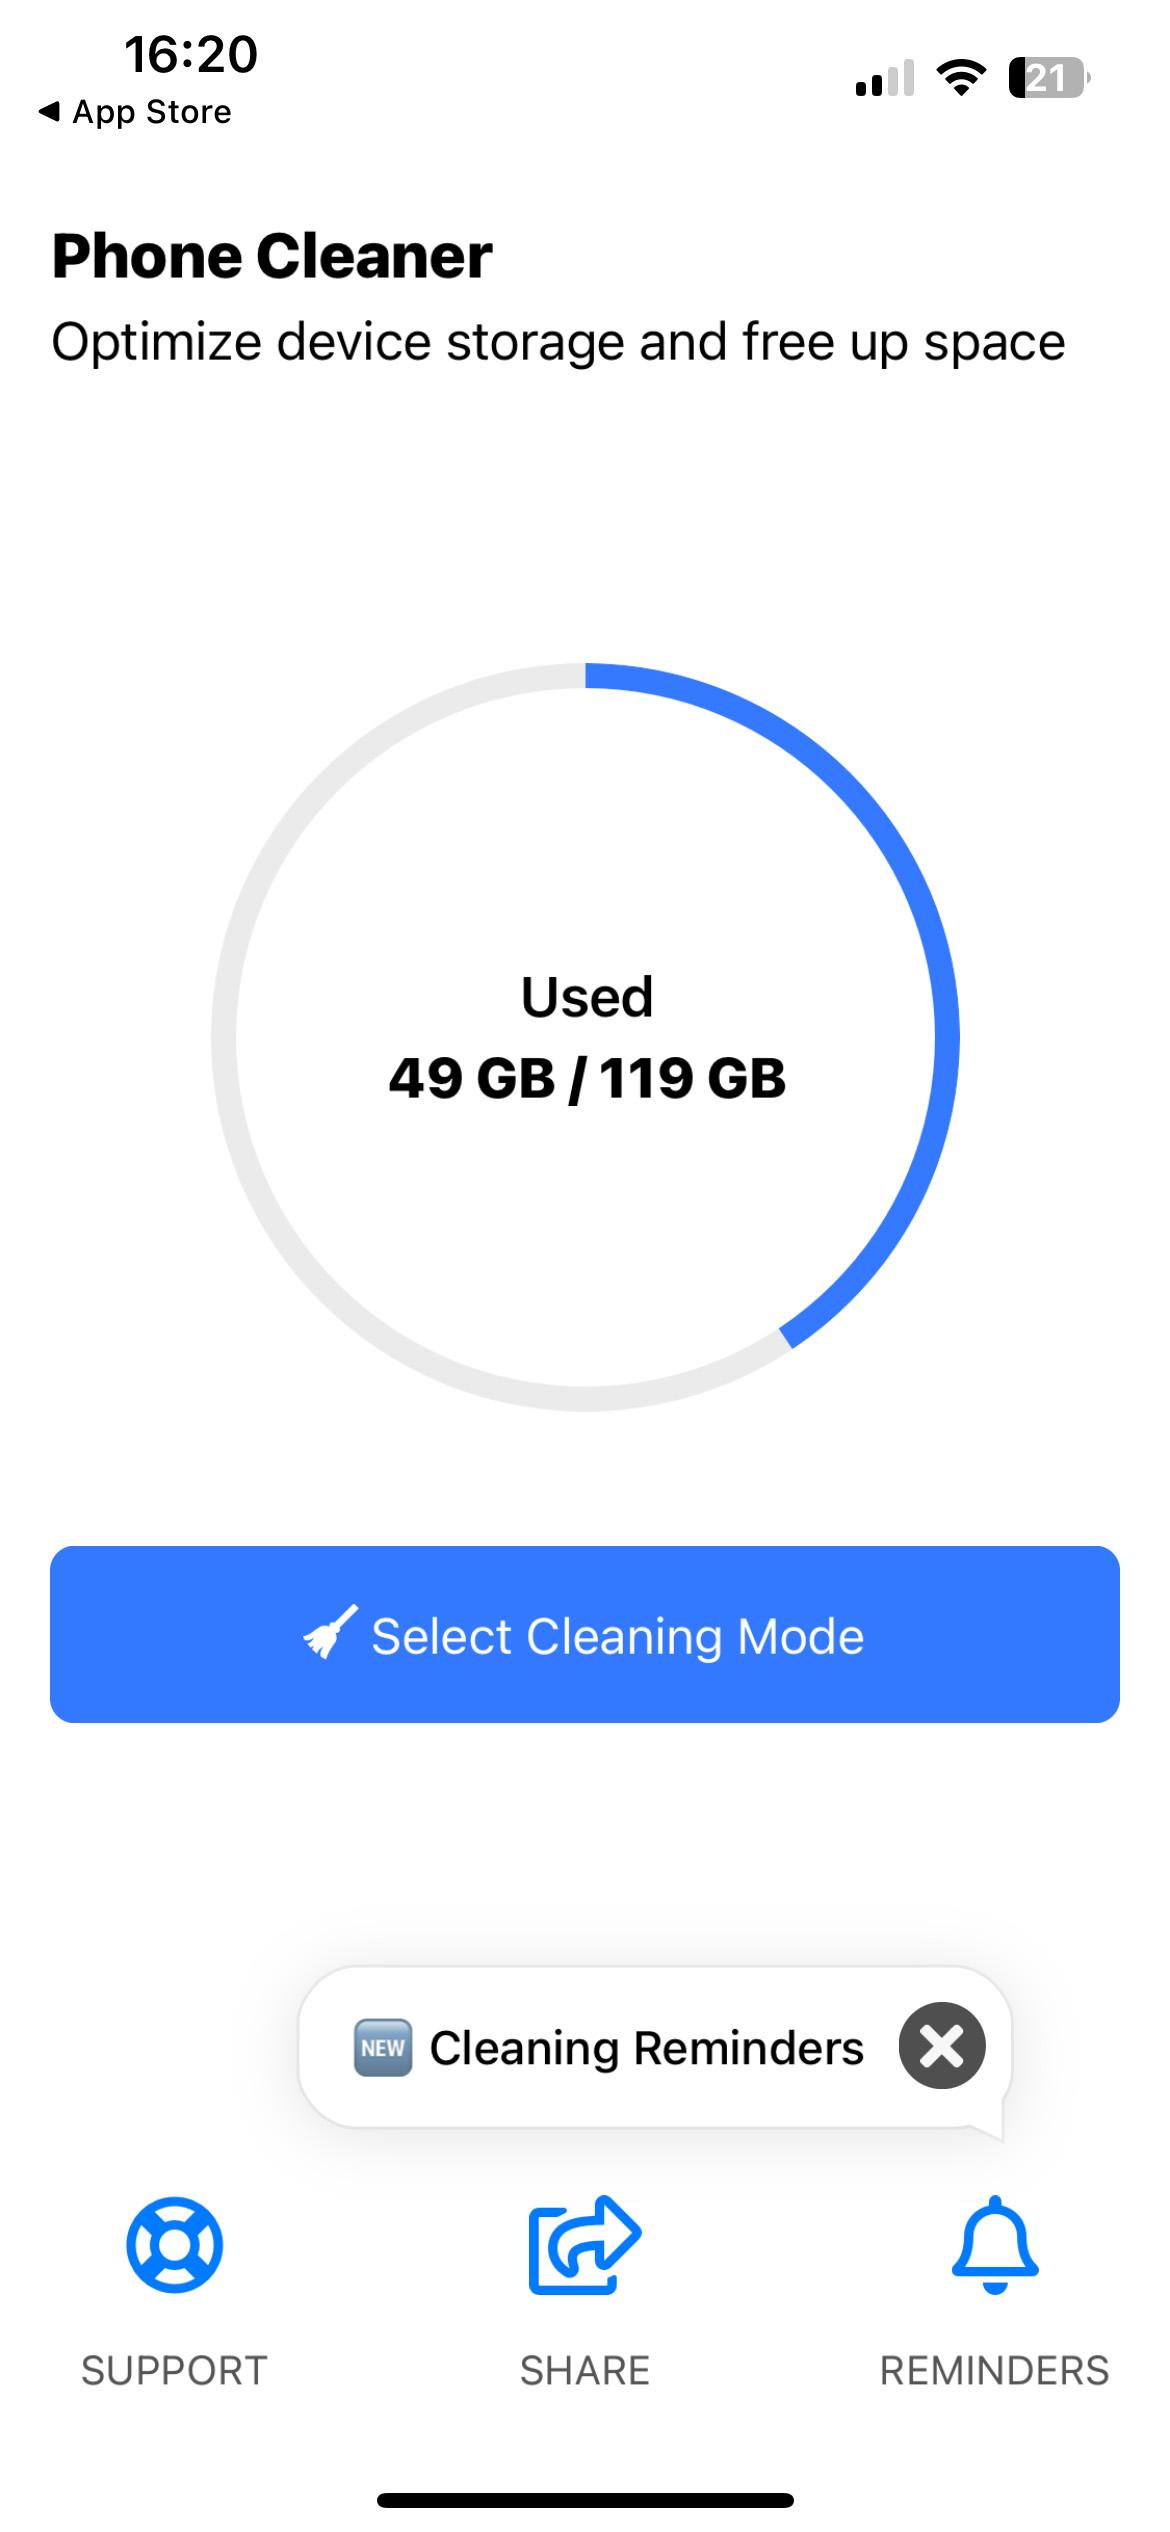 Phone cleaner app for iPhone